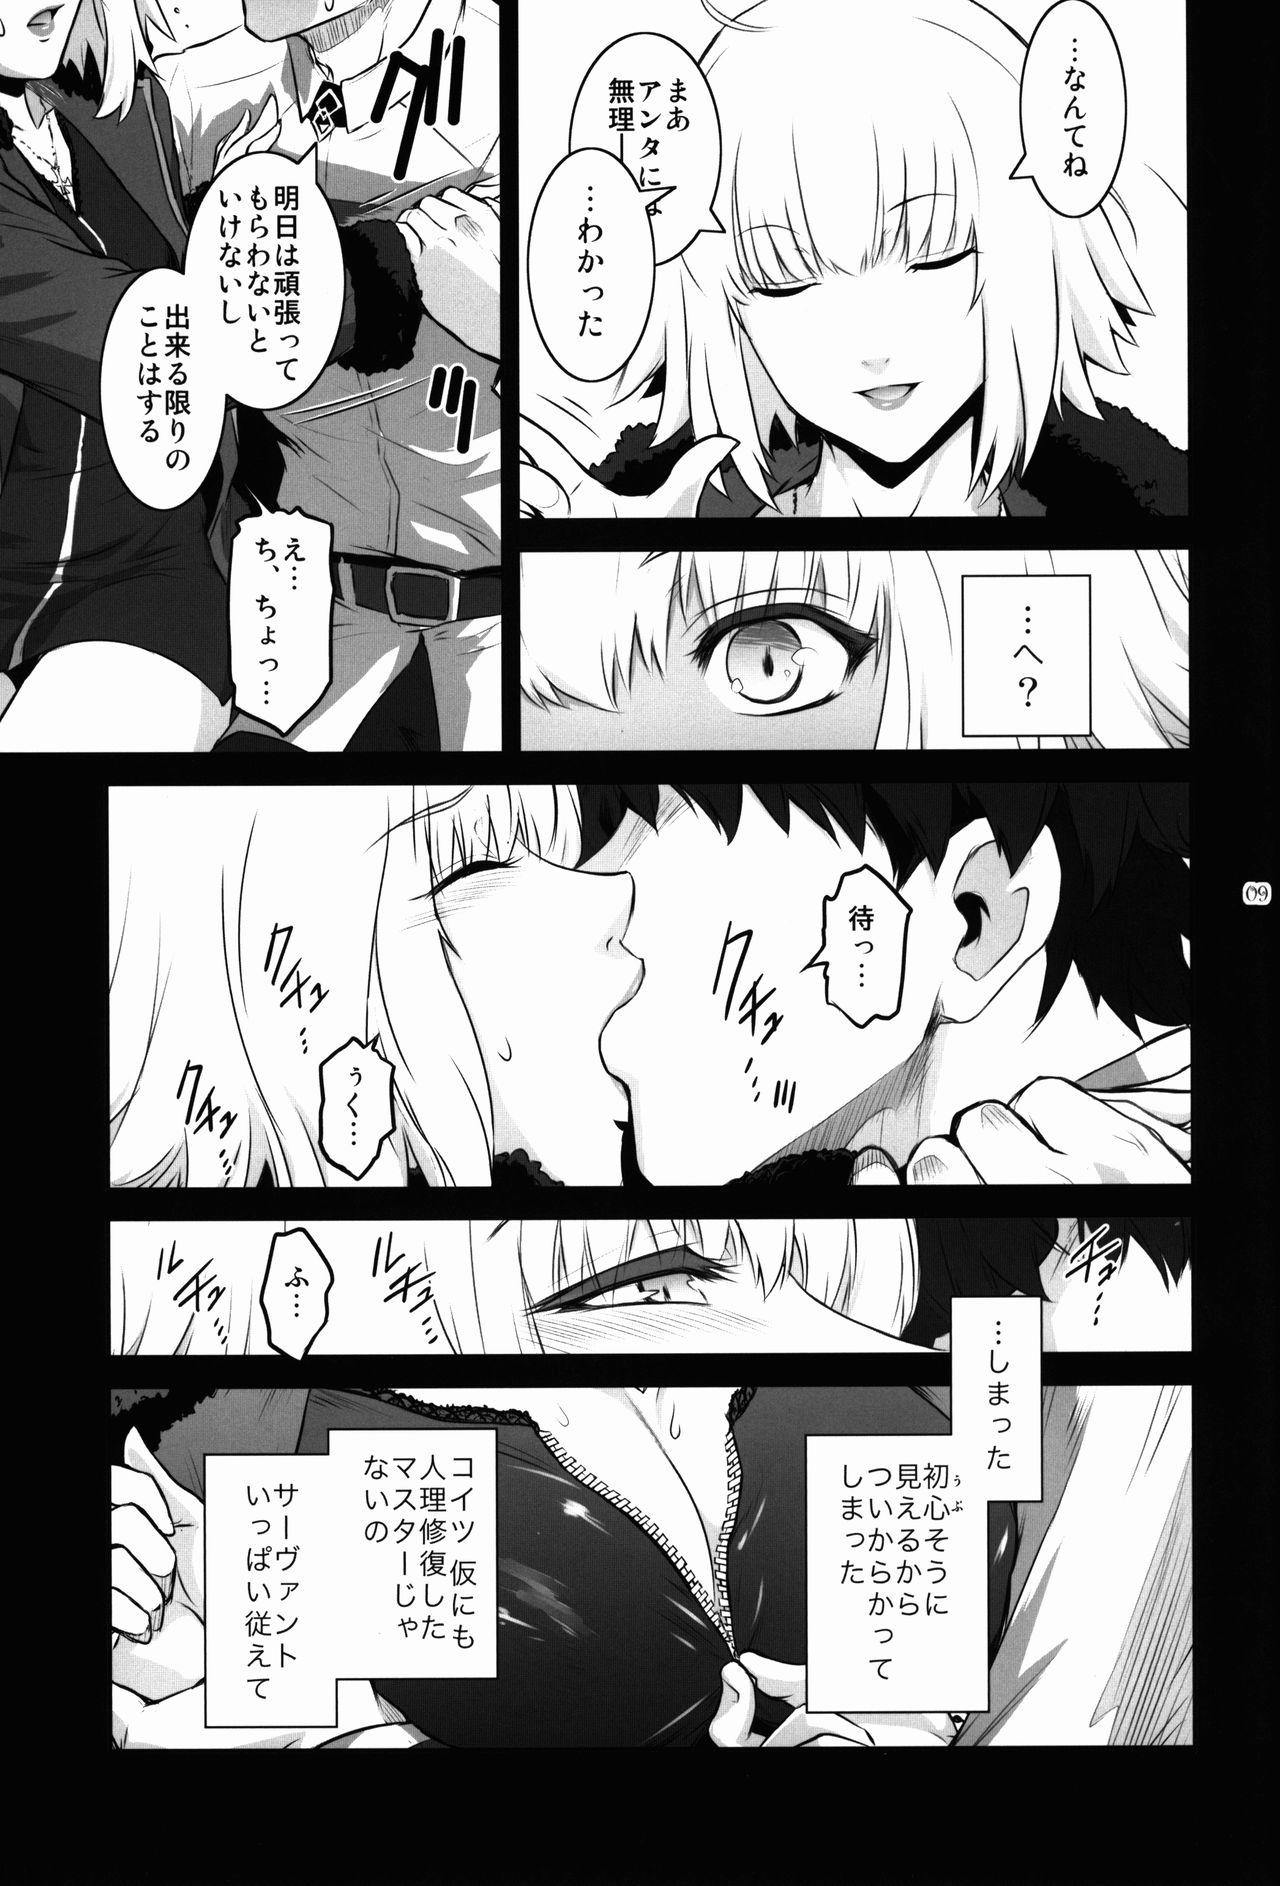 Facefuck MANHUNT - Fate grand order Amatures Gone Wild - Page 9